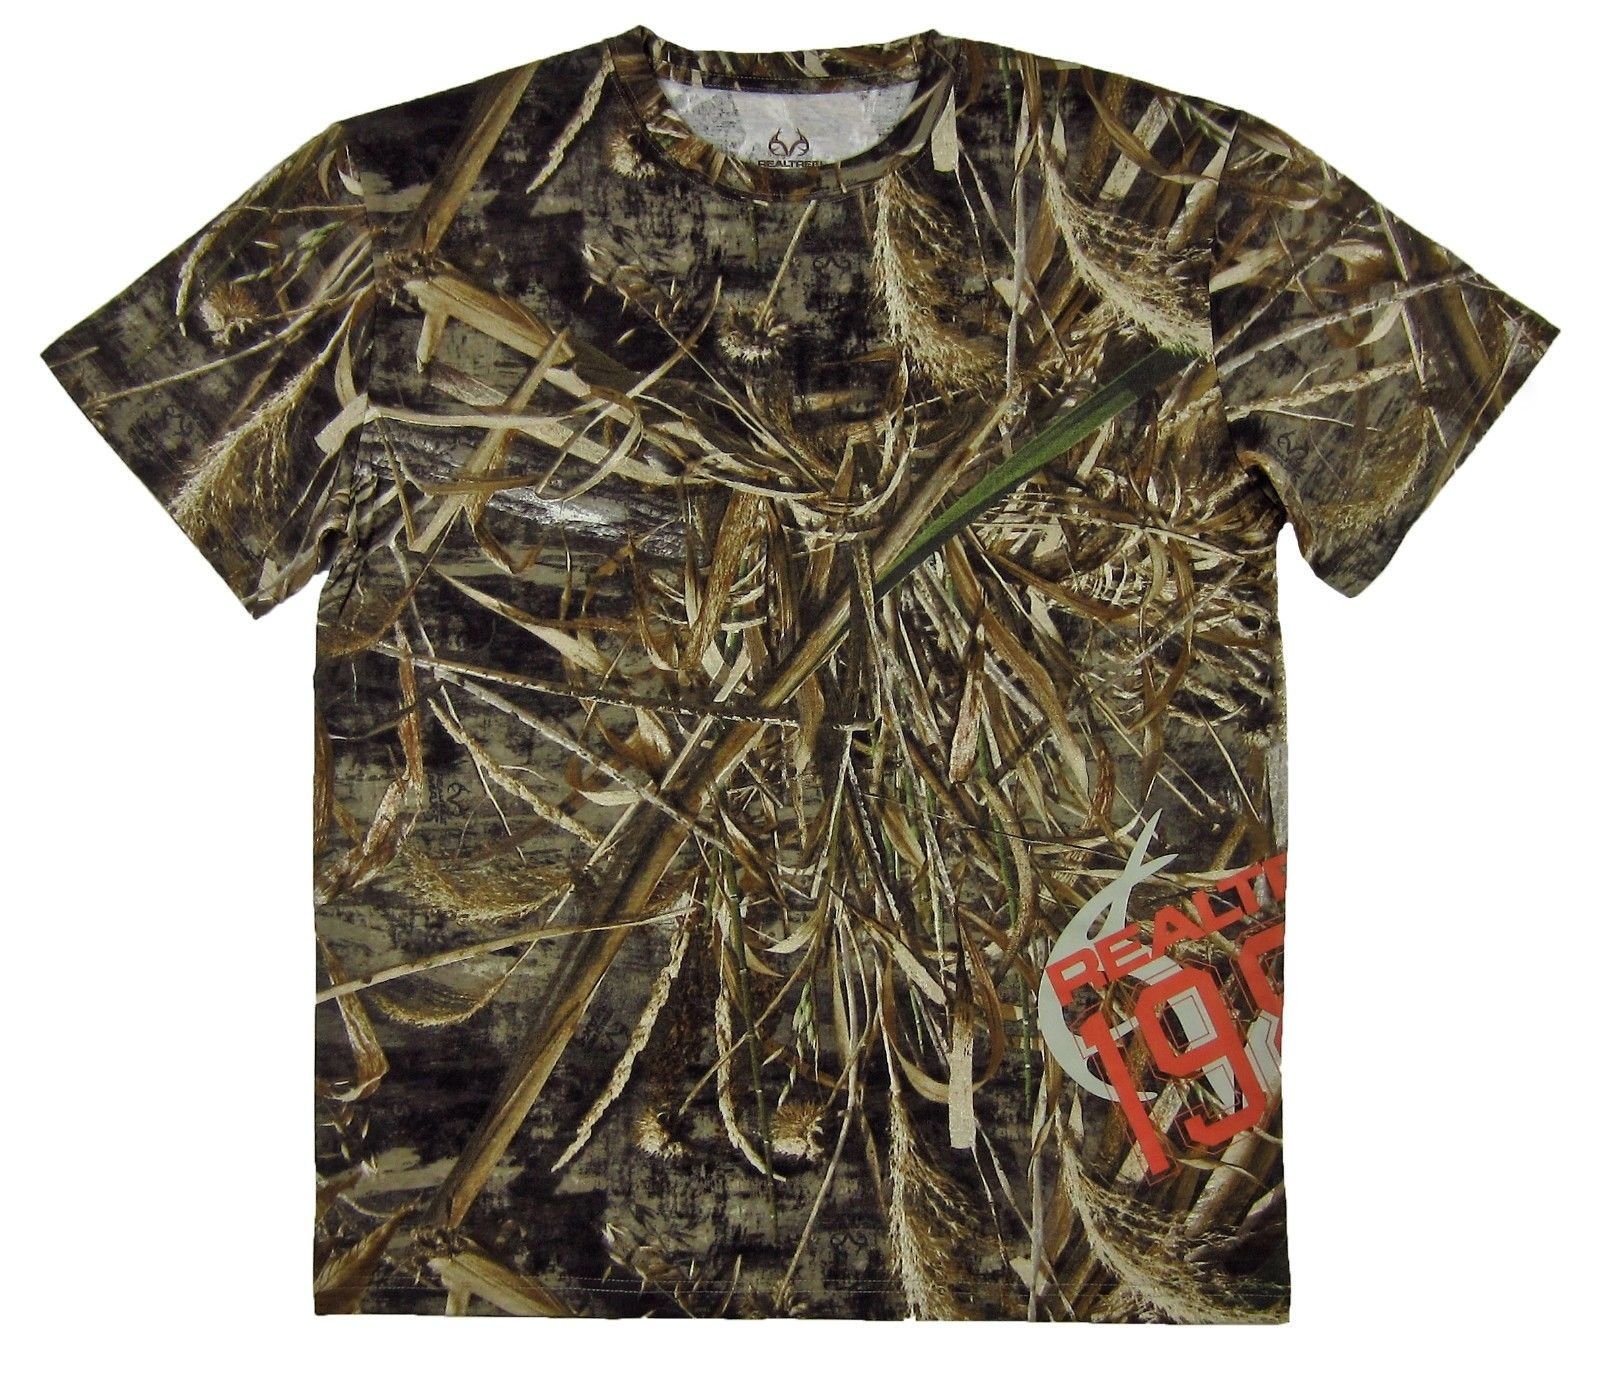 NWT Realtree Men's 1986 Side Wrap Tee Max-5 Camo Camouflage T-Shirt ...